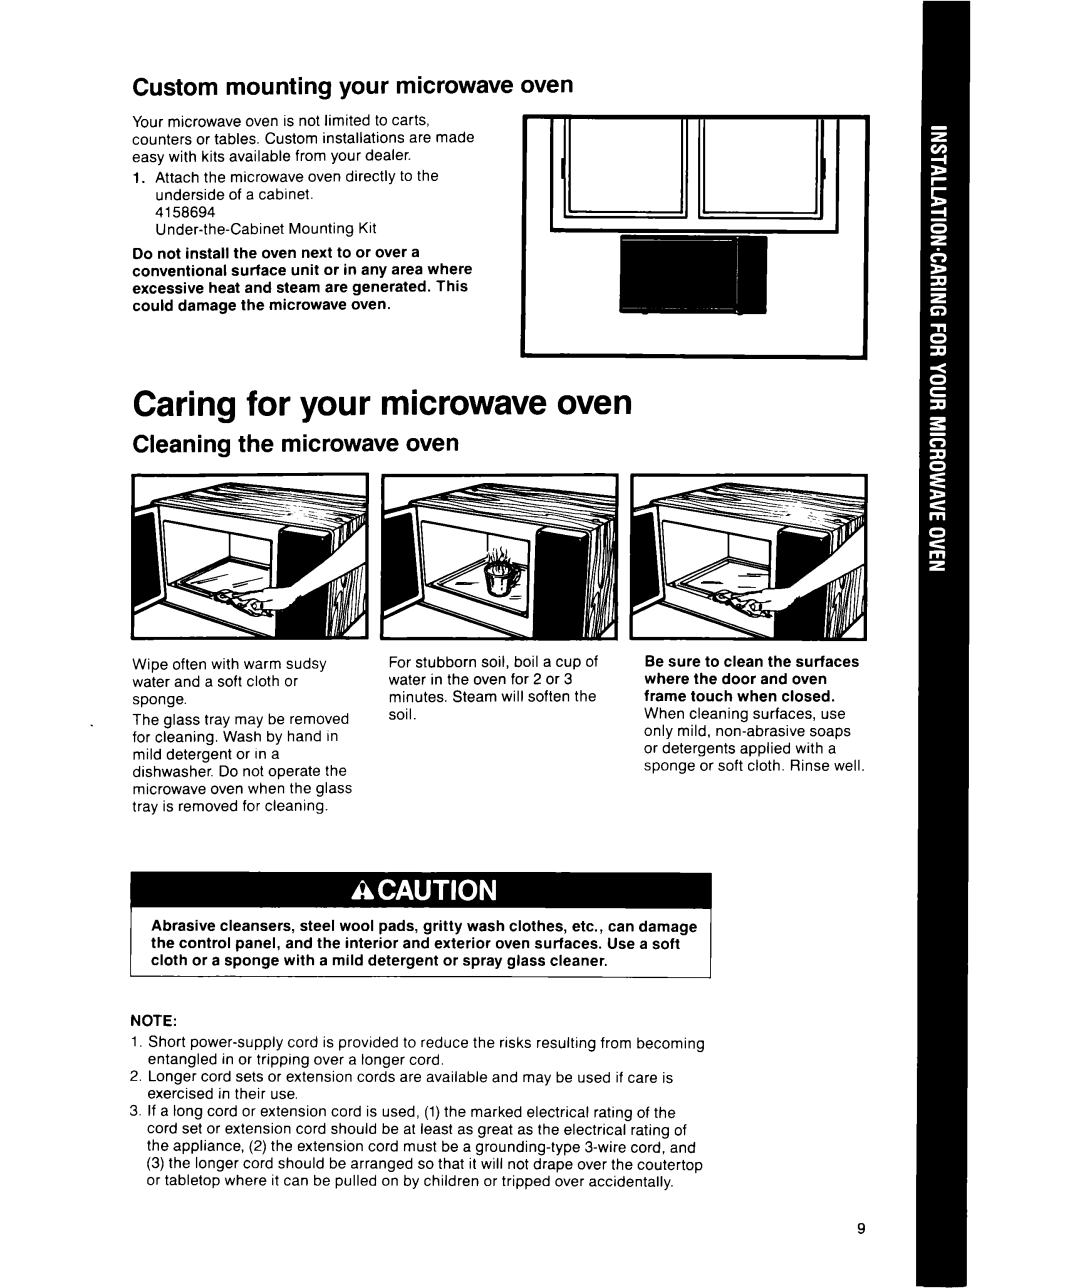 Whirlpool MS1600XW manual Caring for your microwave oven, Custom mounting your microwave oven, Cleaning the microwave oven 